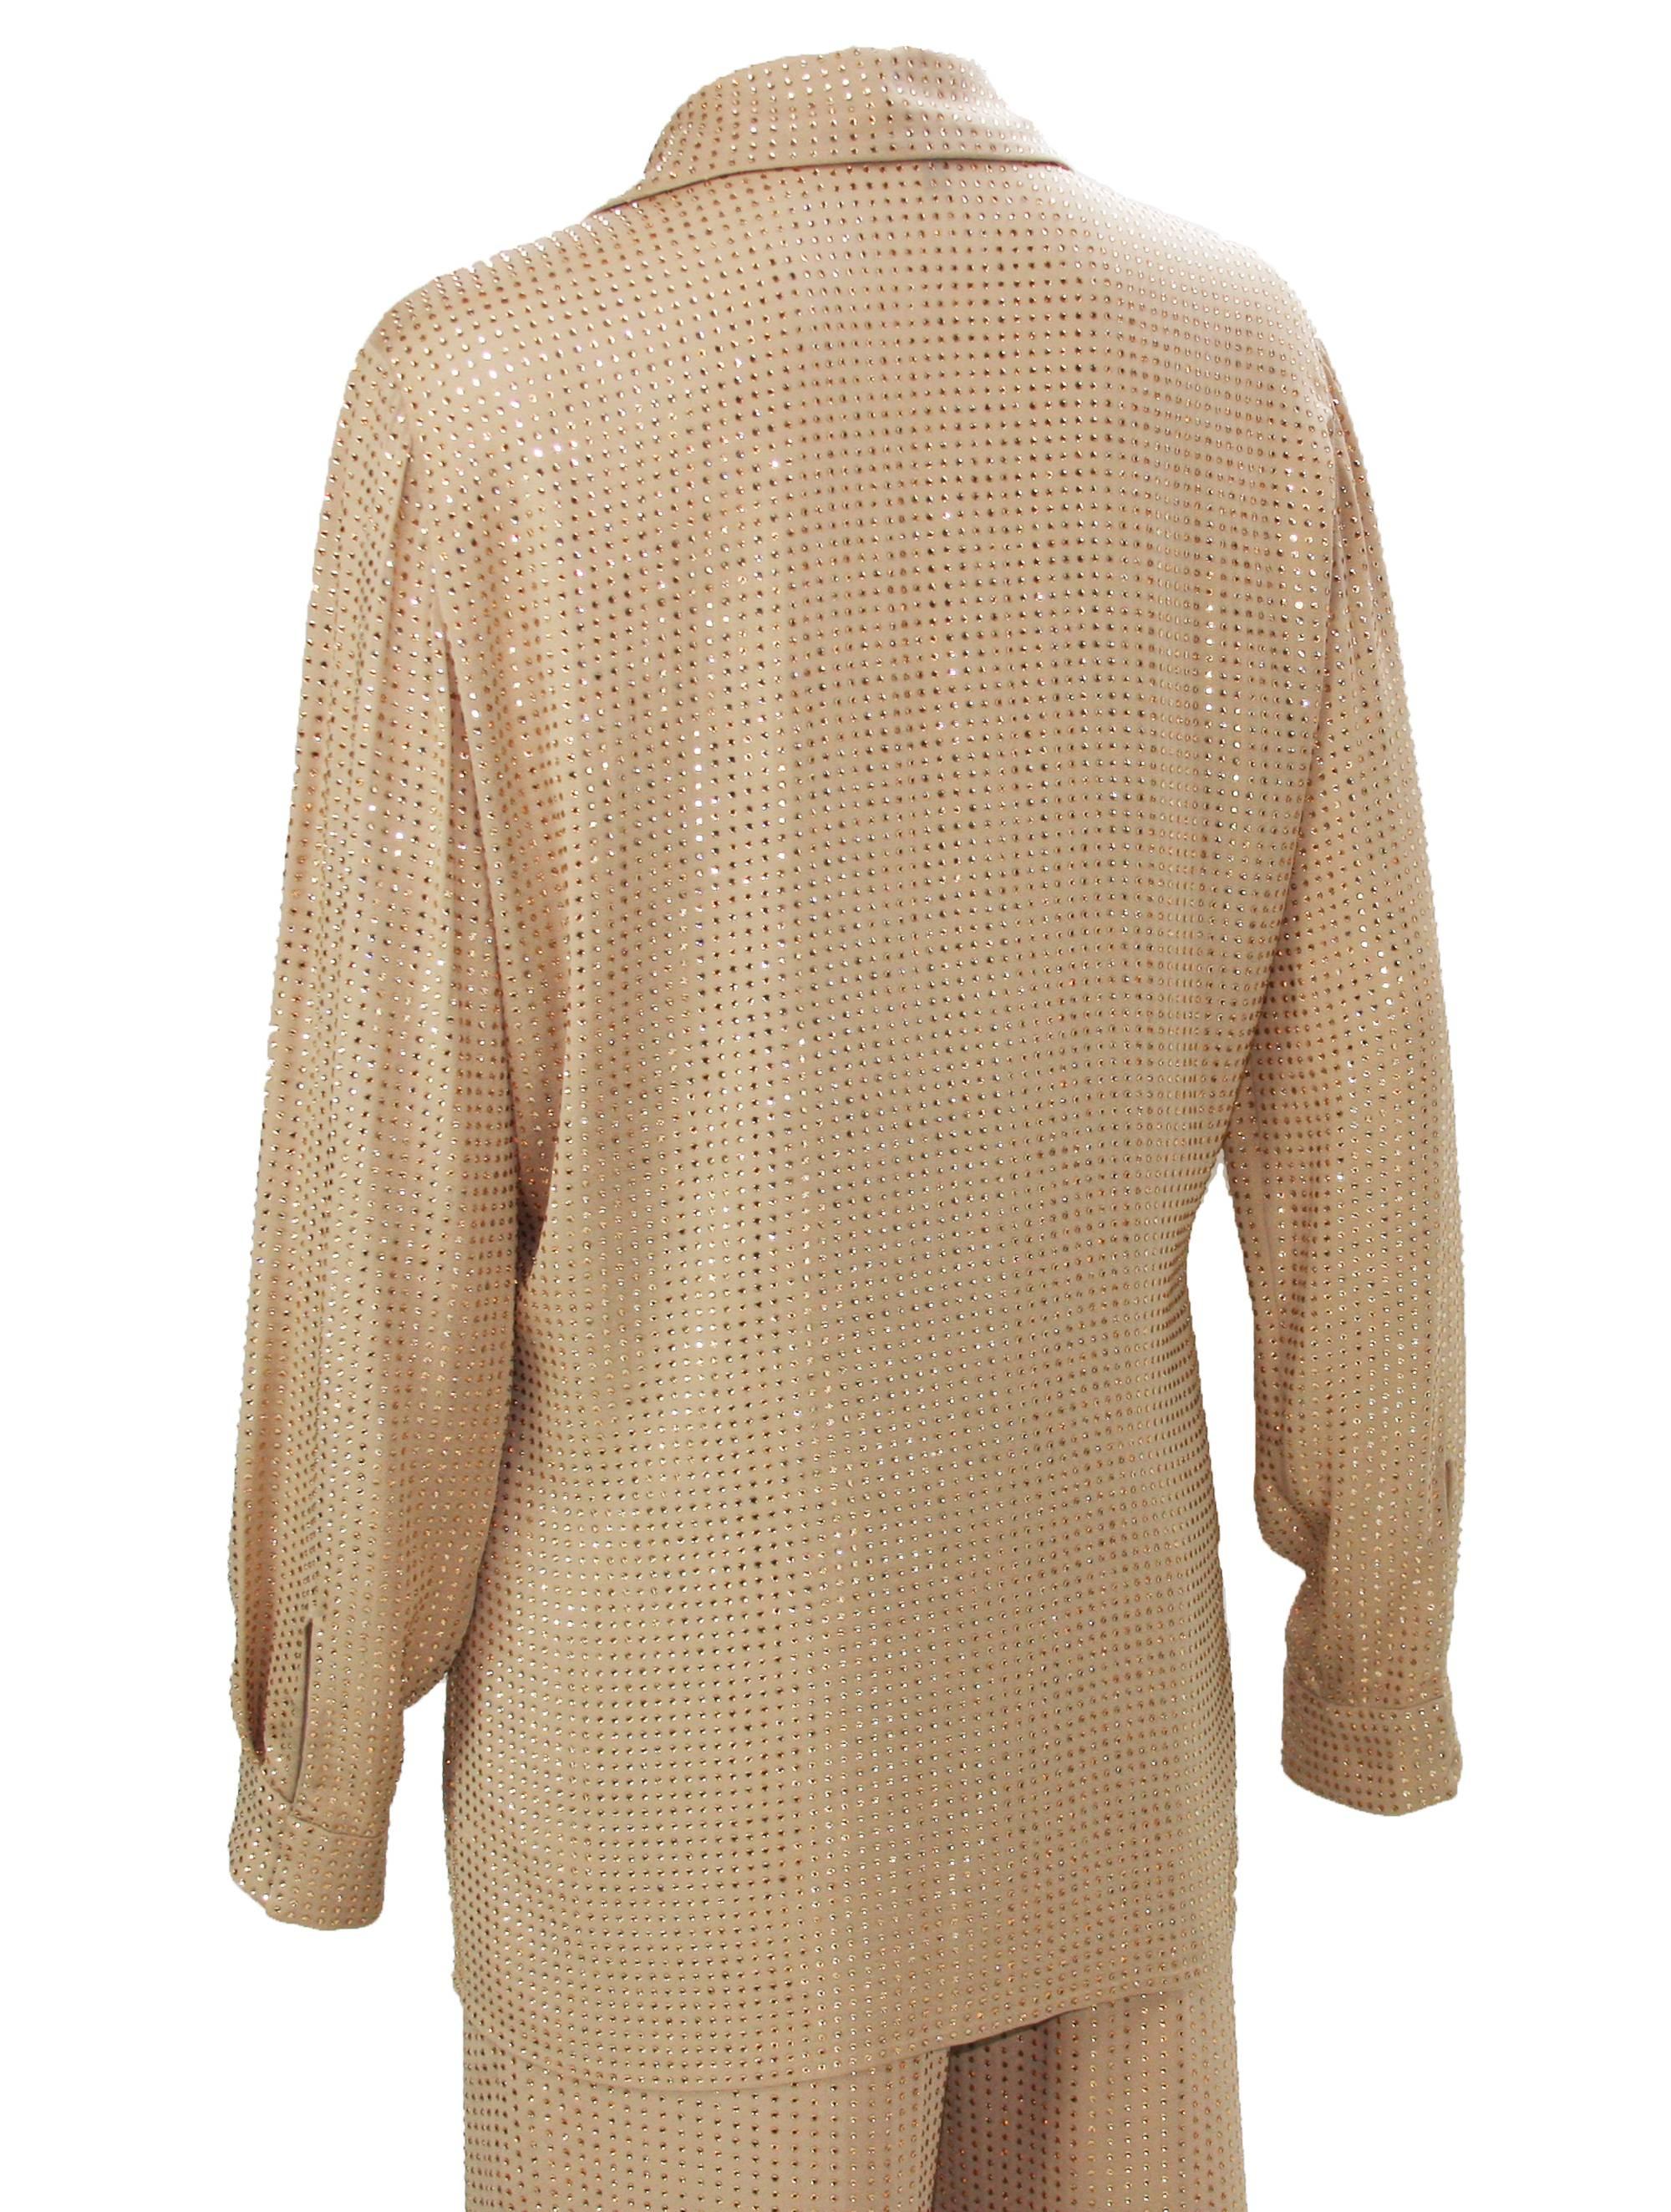 New Gucci Fully Embellished Rhinestone Tan Evening Pant Suit Italian 40 In New Condition For Sale In Montgomery, TX